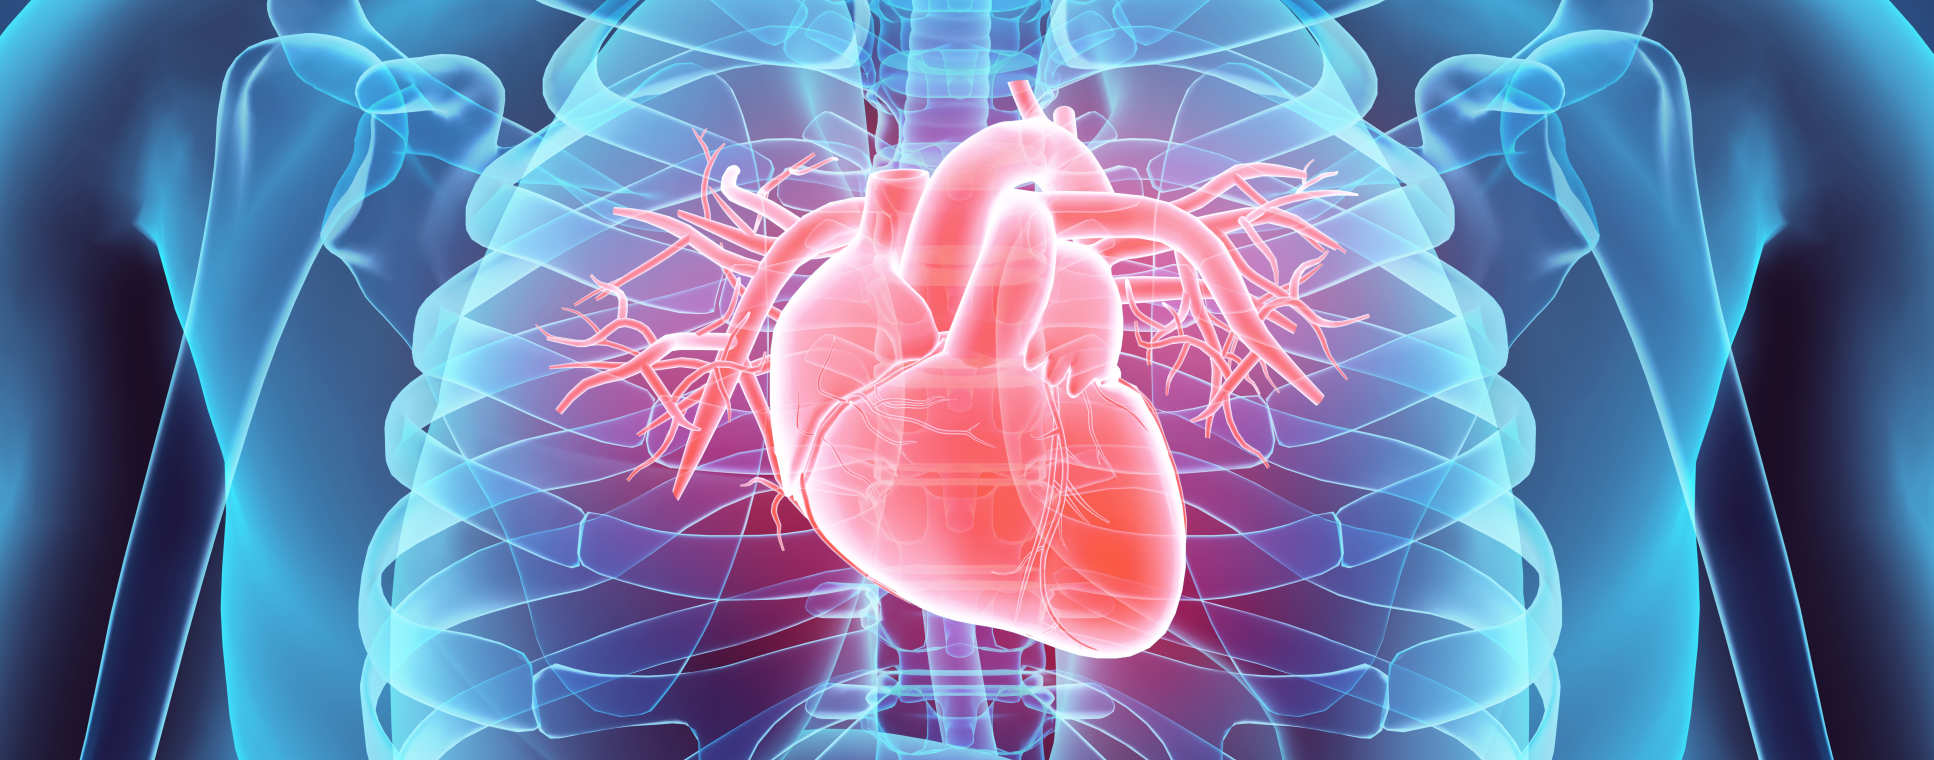 A graphic illustration of a heart